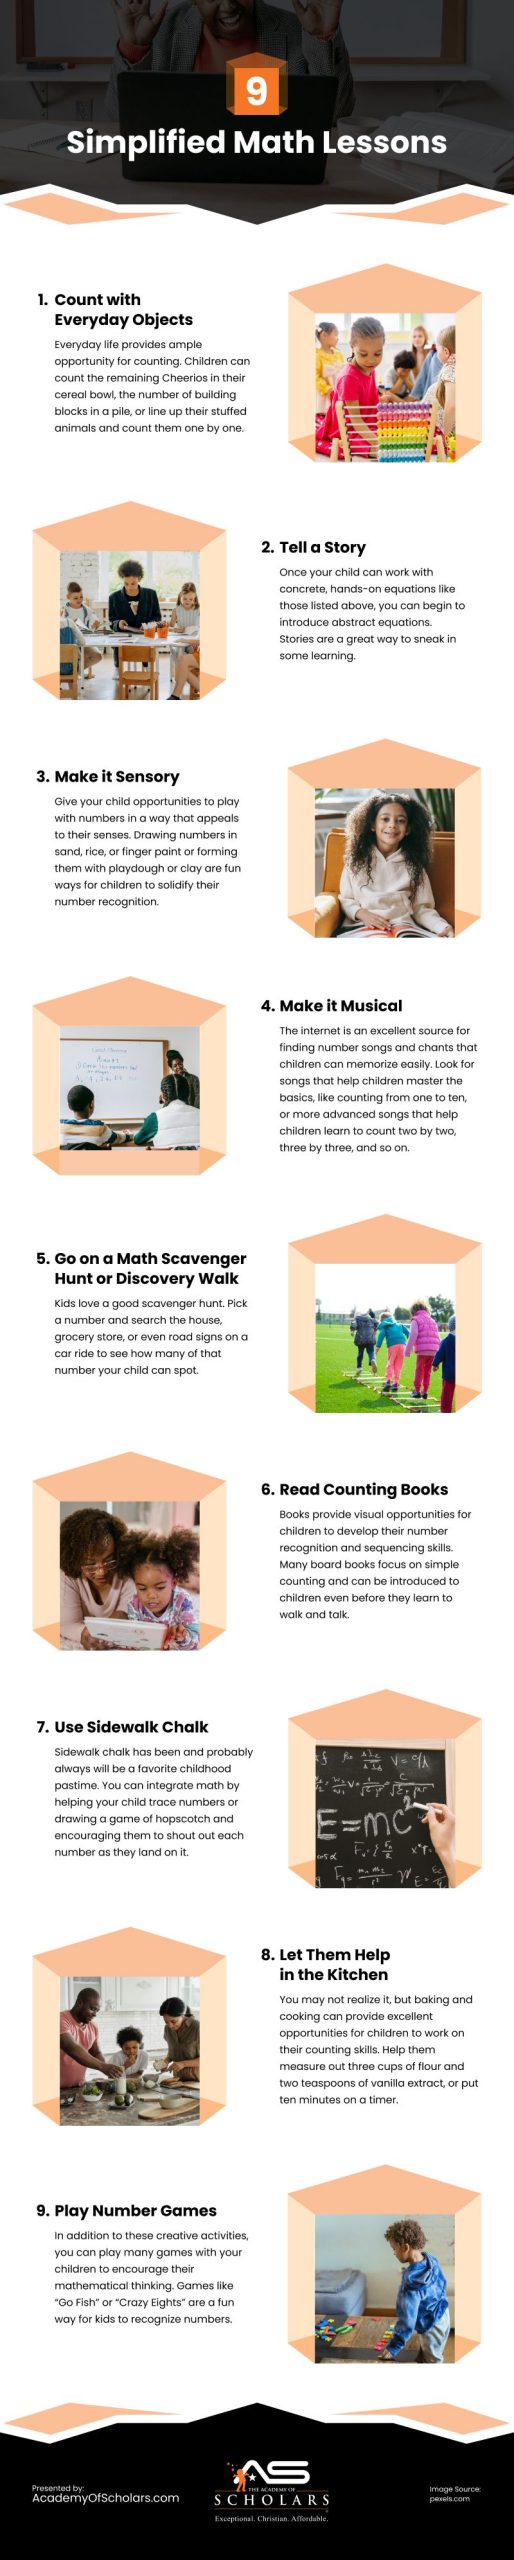 9 Simplified Math Lessons Infographic